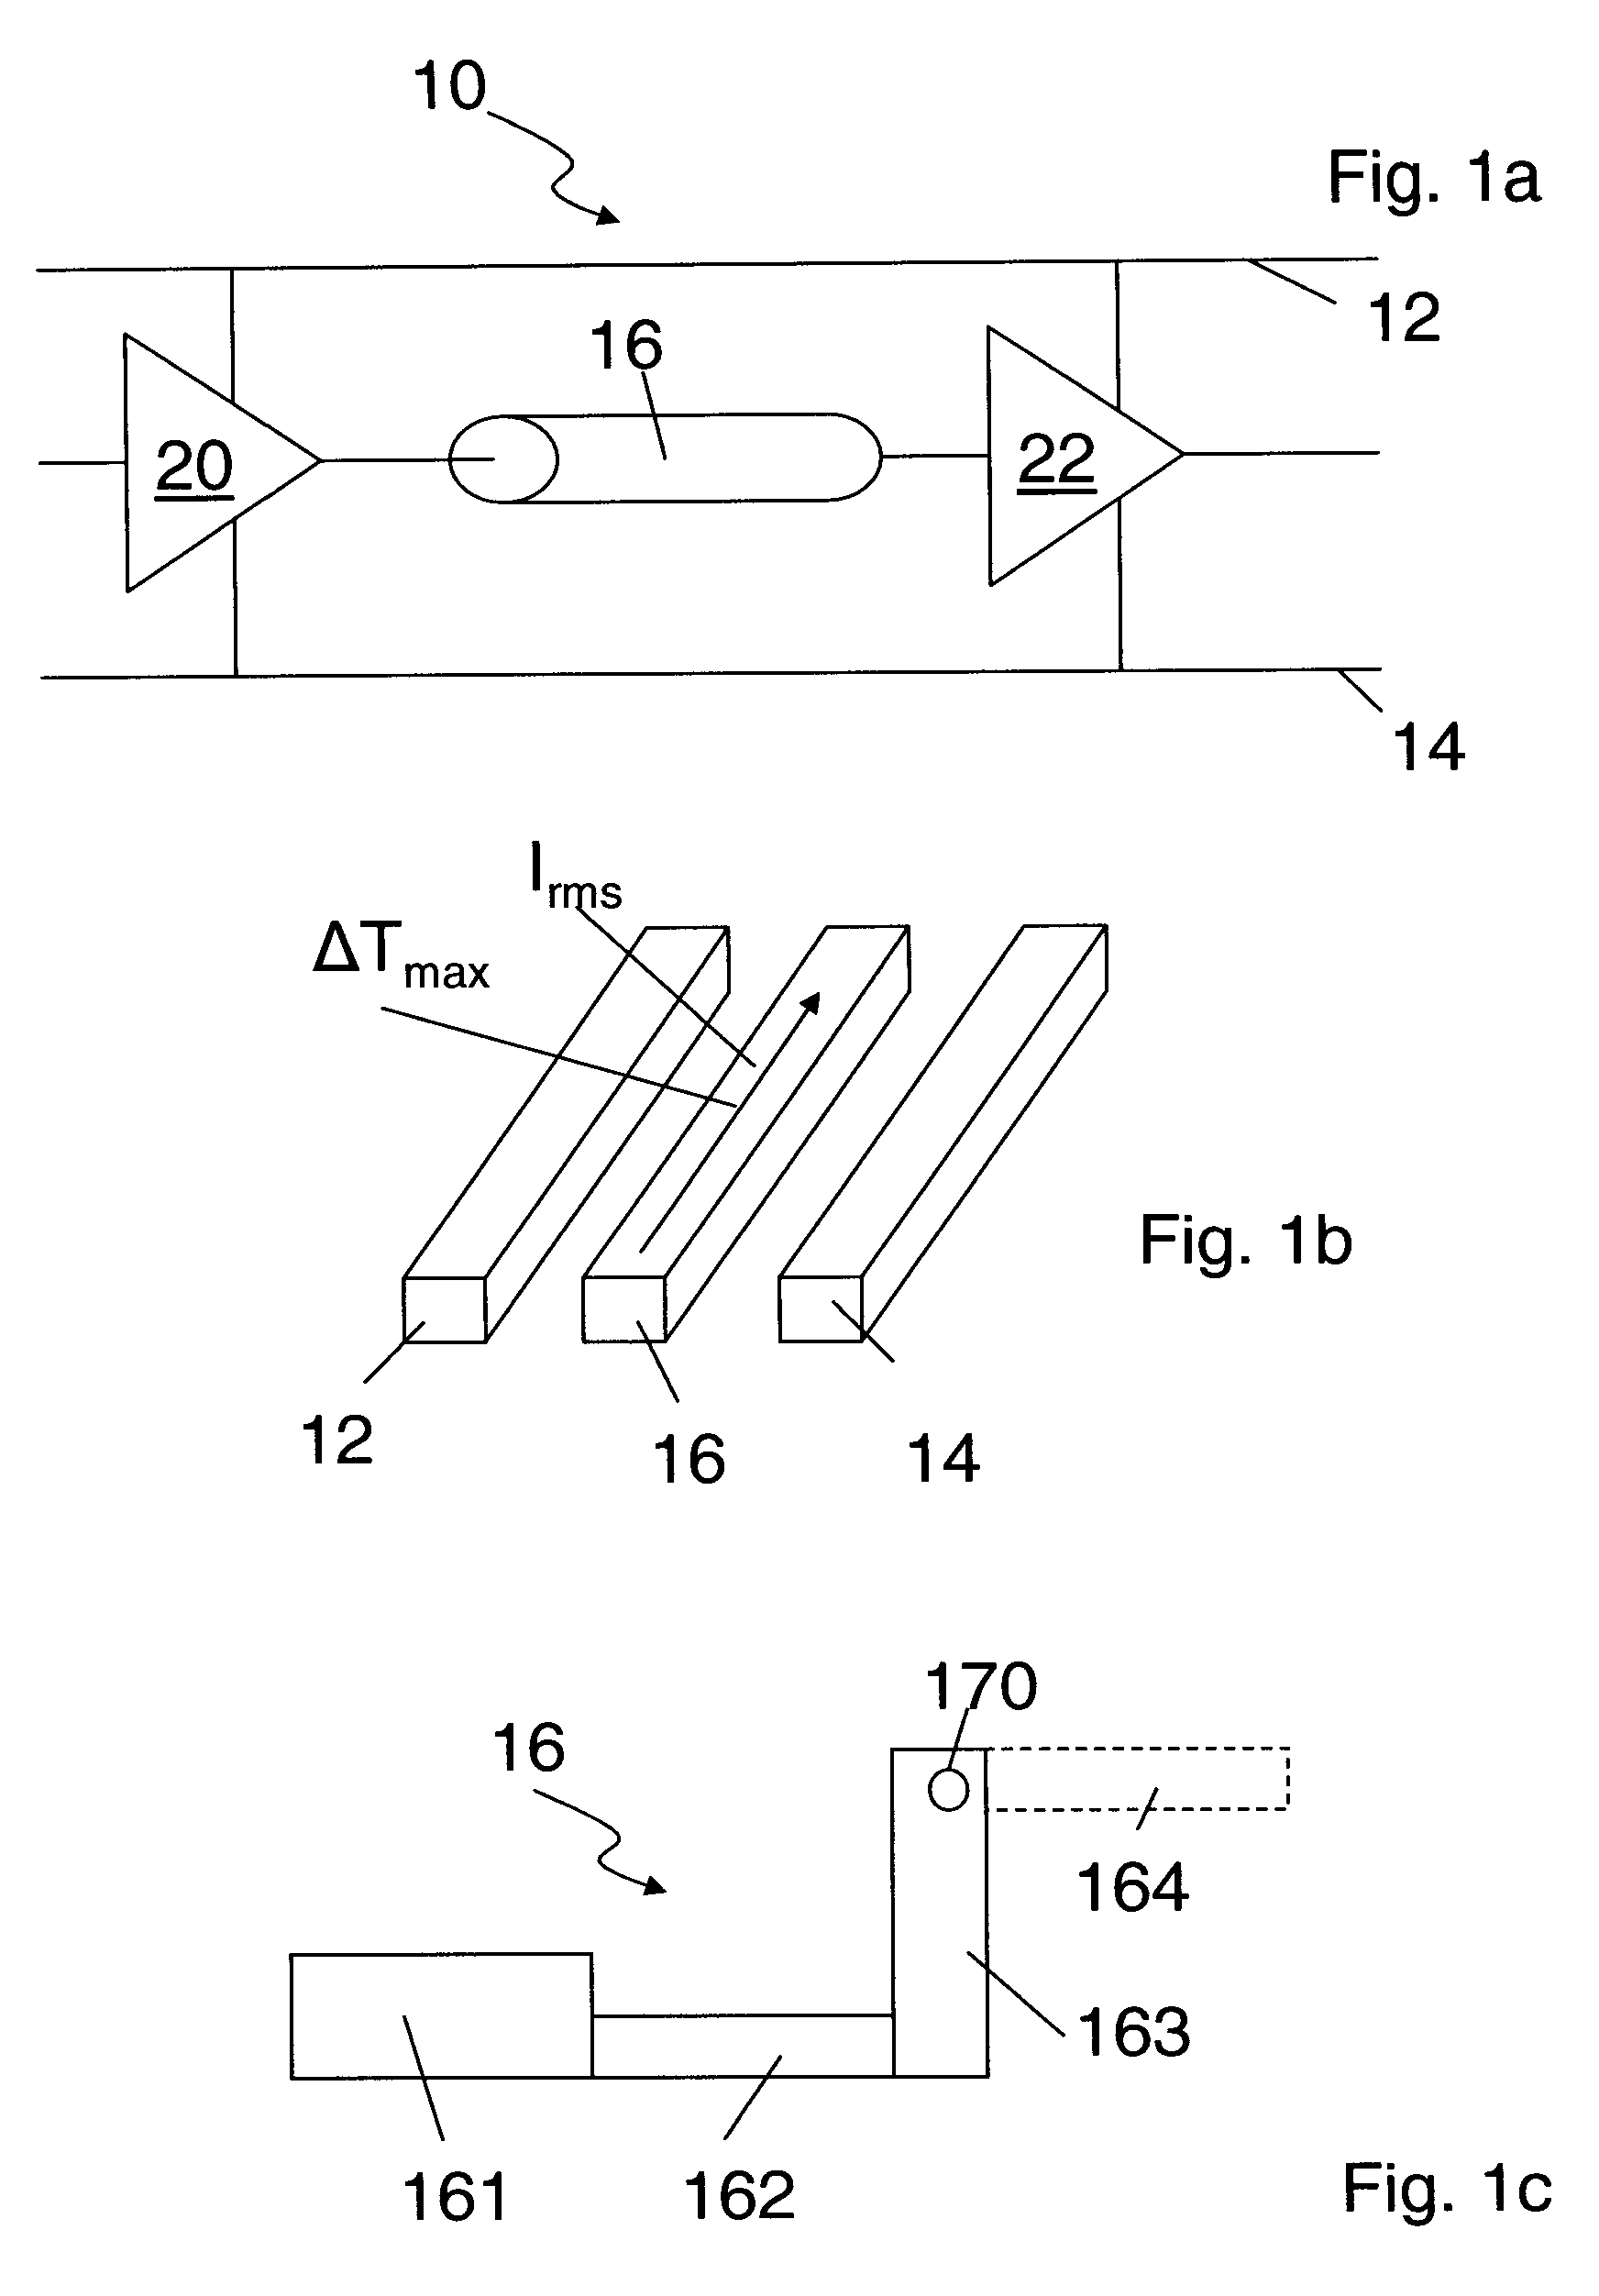 Method and System for Electromigration Analysis on Signal Wiring